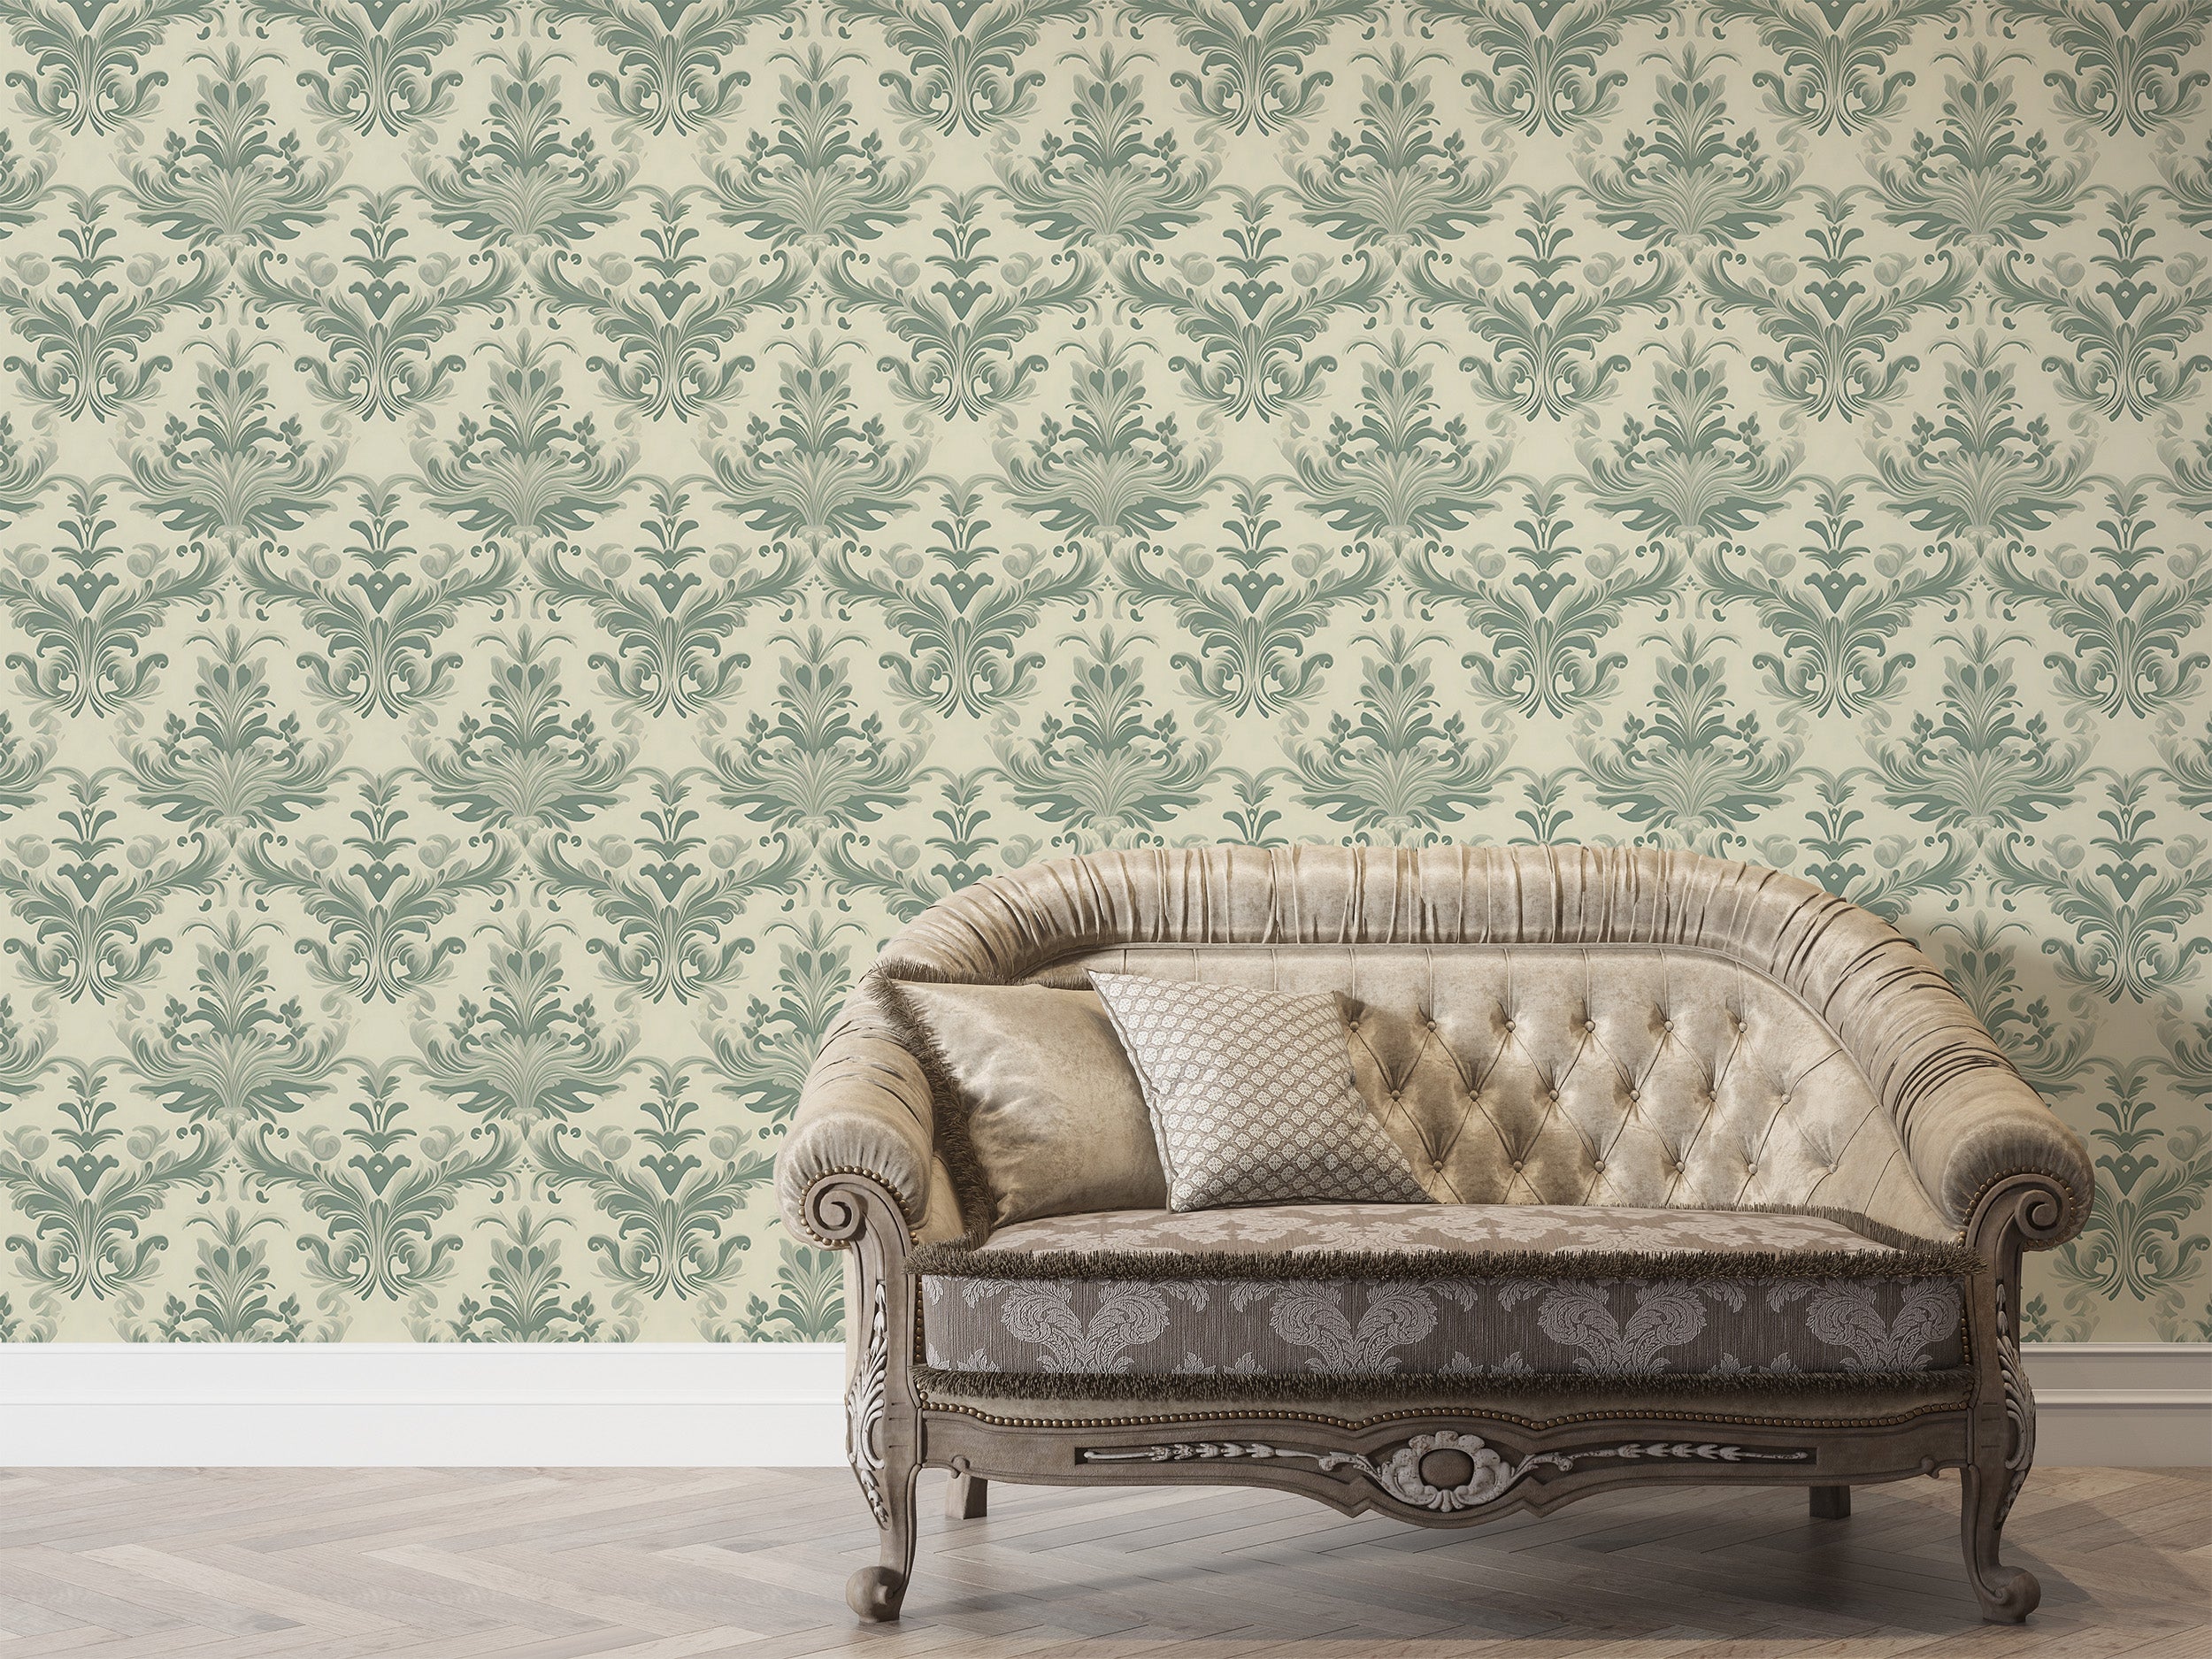 Vintage Charm in Green and Beige Wall Design